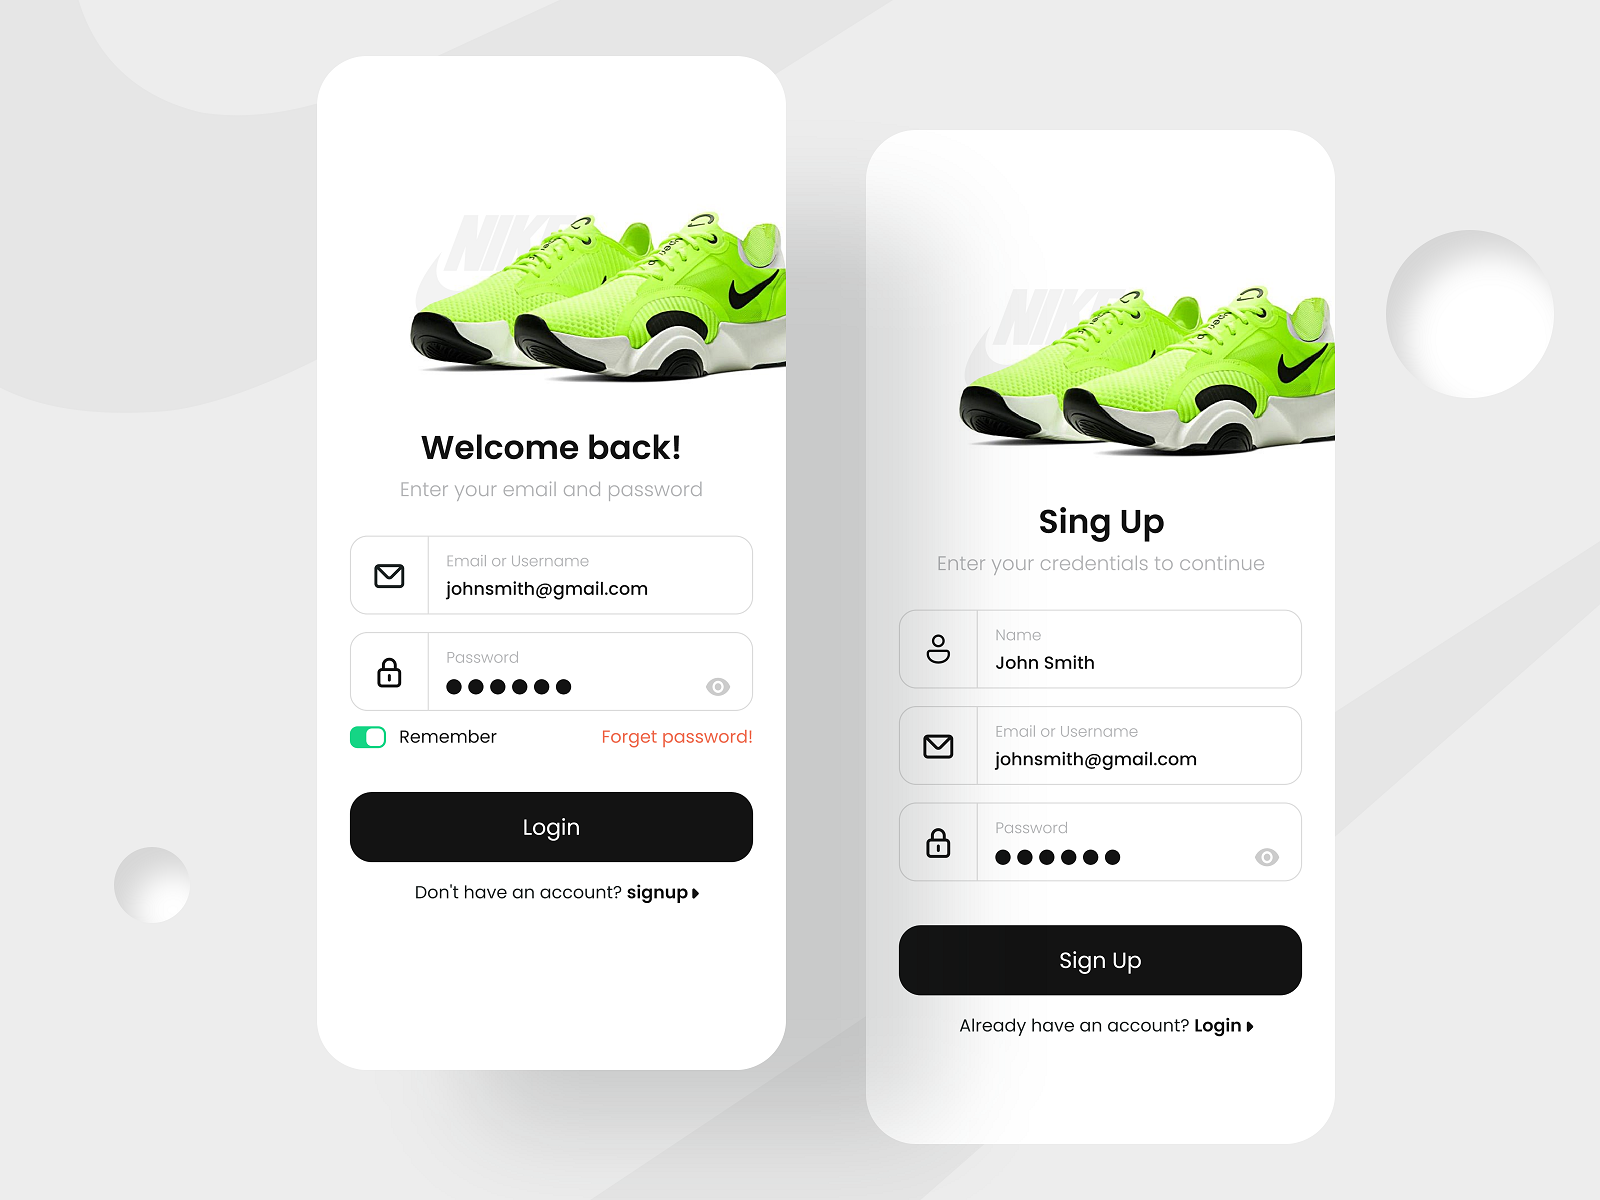 Nike Shoes & Sign by Parves Ahamad on Dribbble